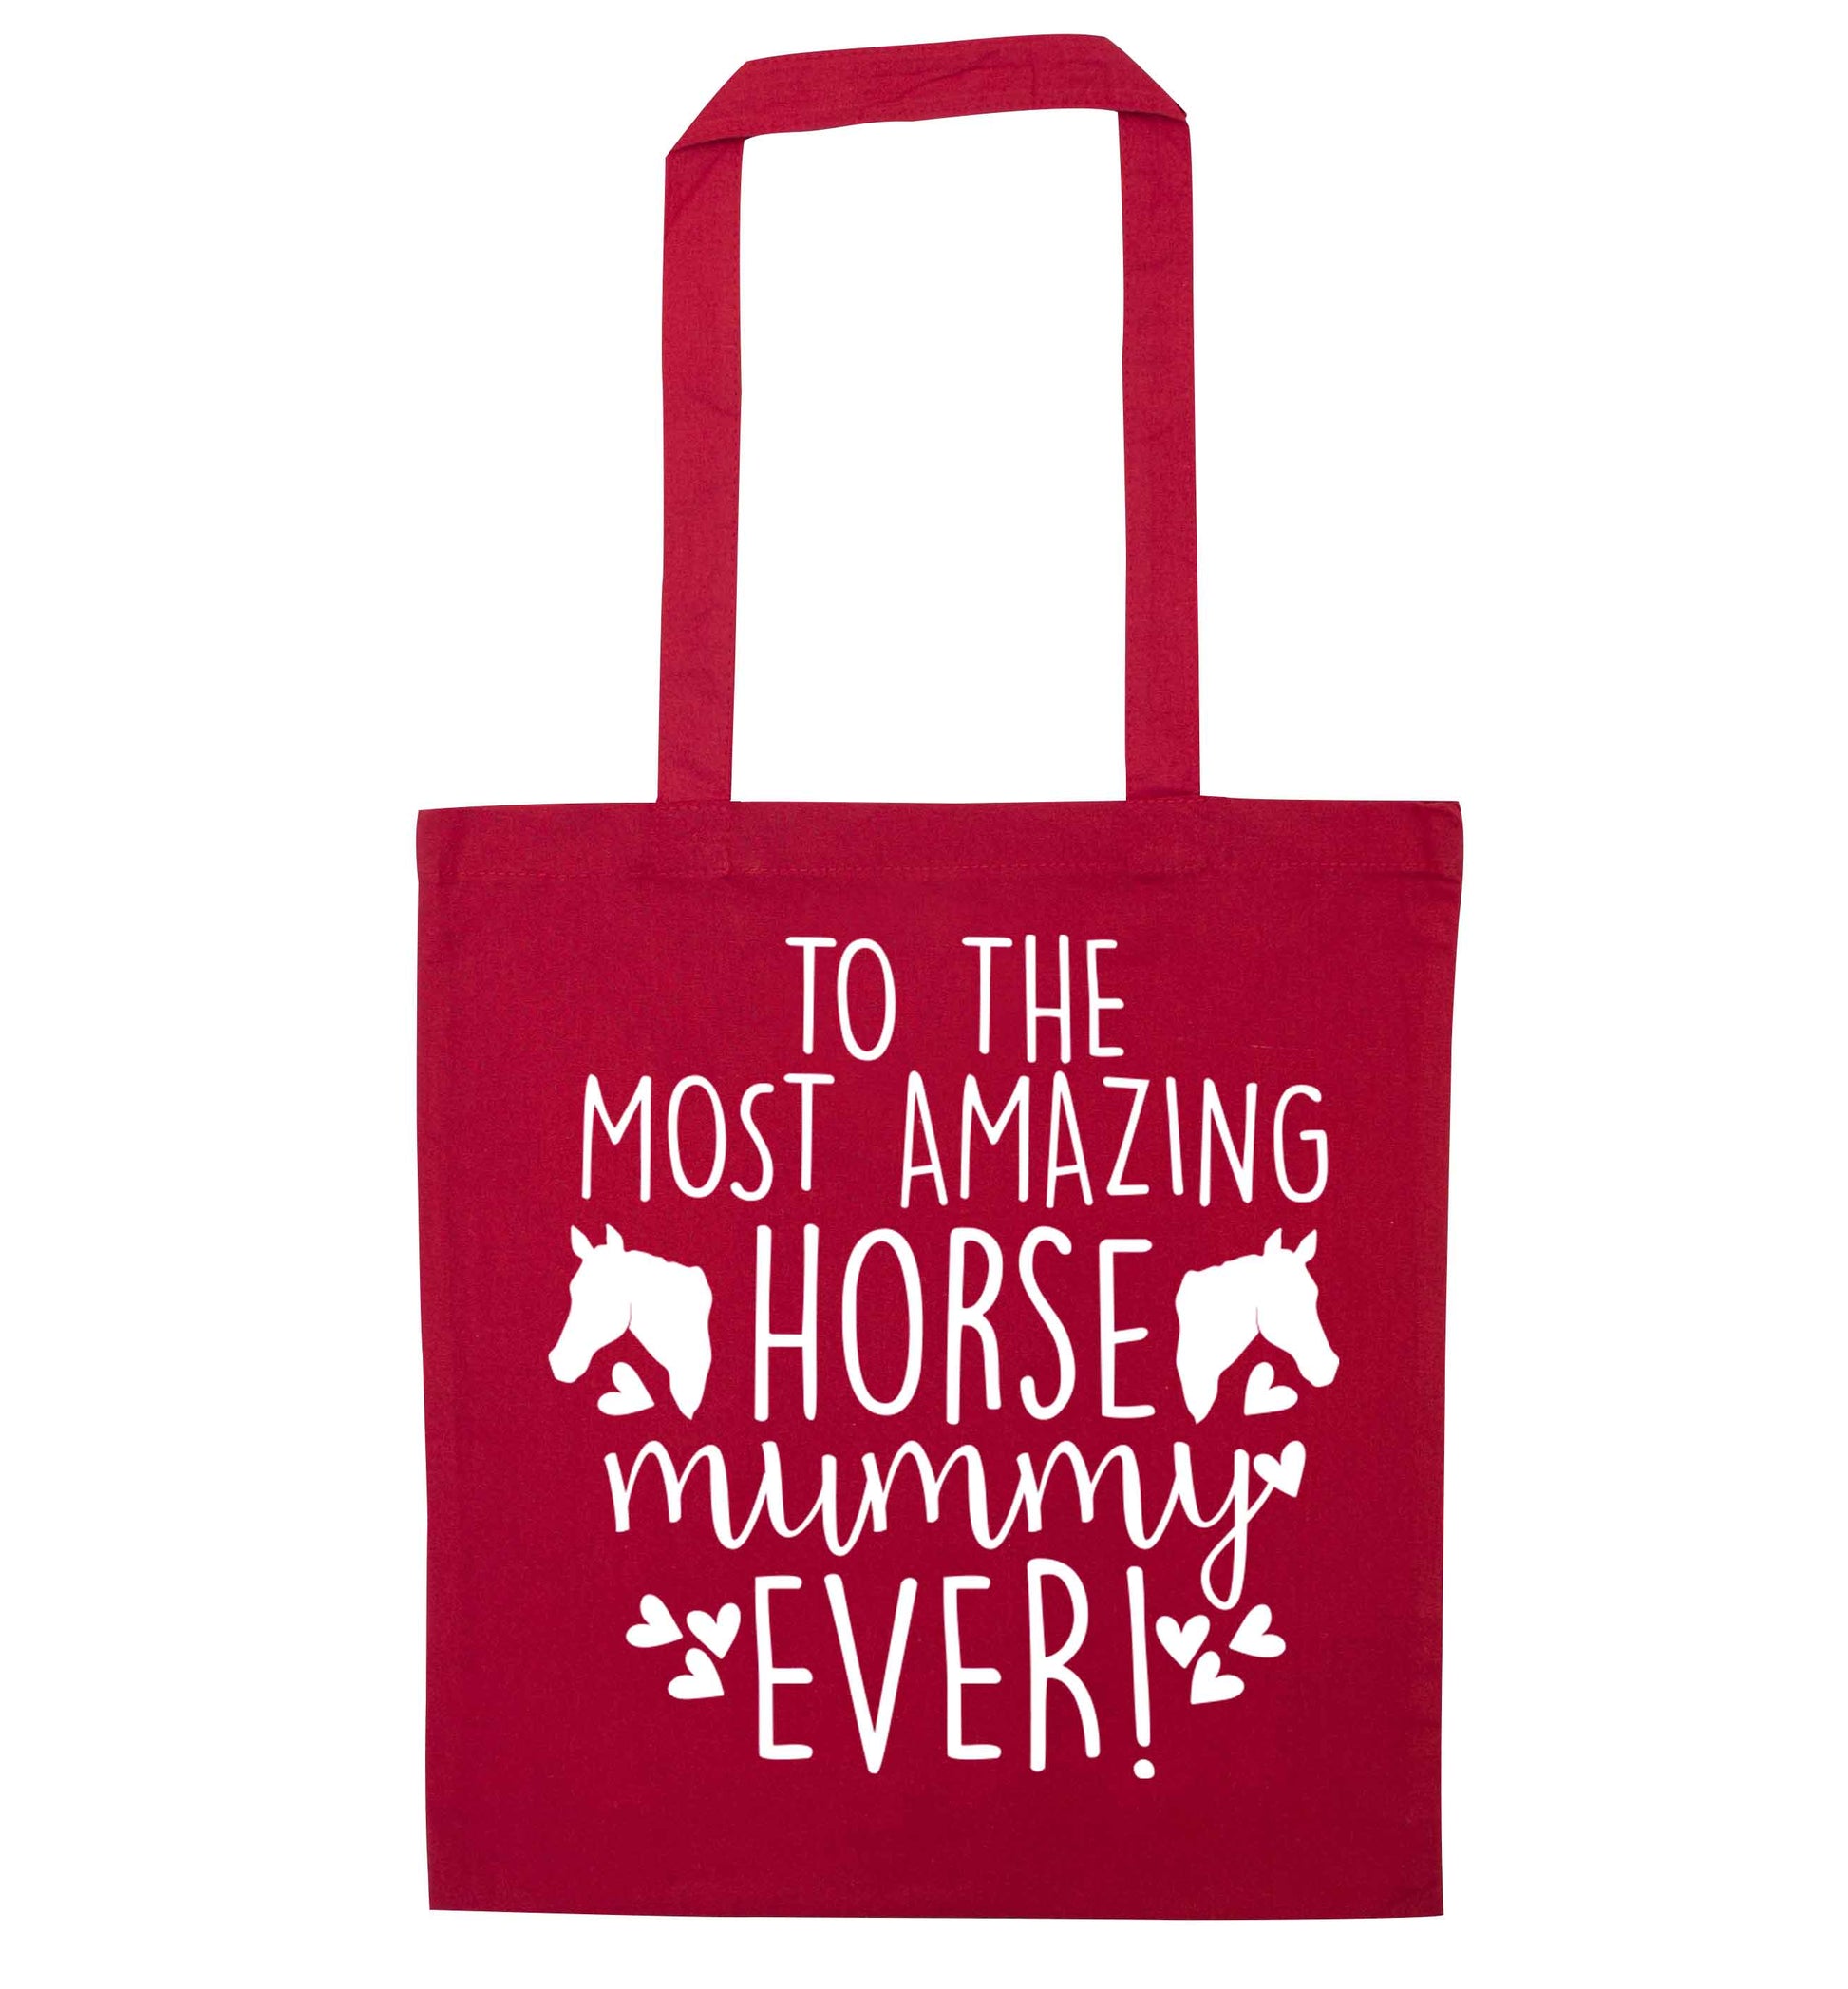 To the most amazing horse mummy ever! red tote bag